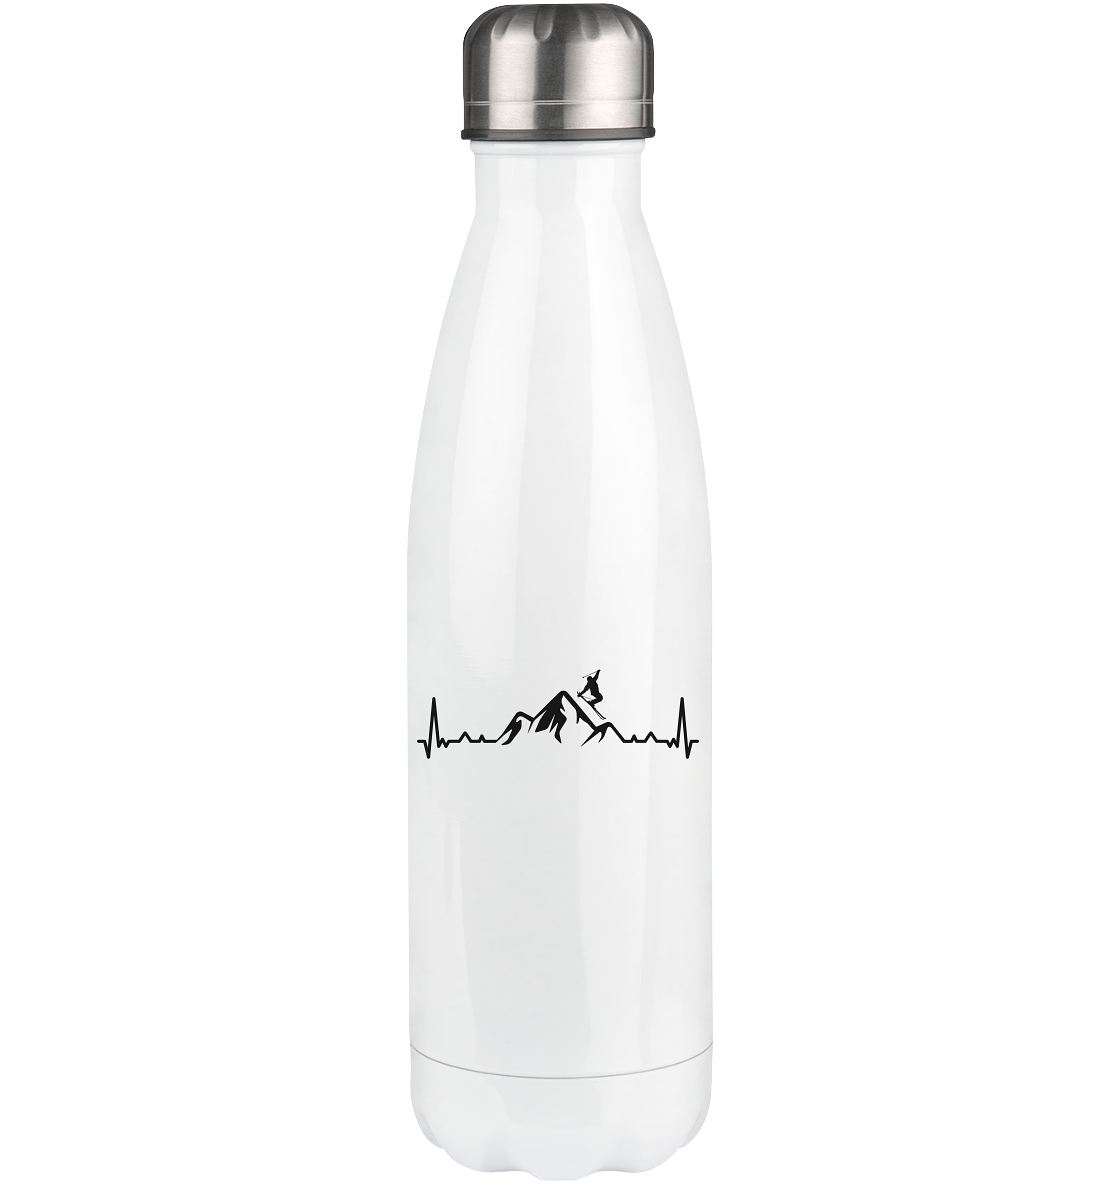 Heartbeat Mountain and Skiing - Edelstahl Thermosflasche klettern ski 500ml